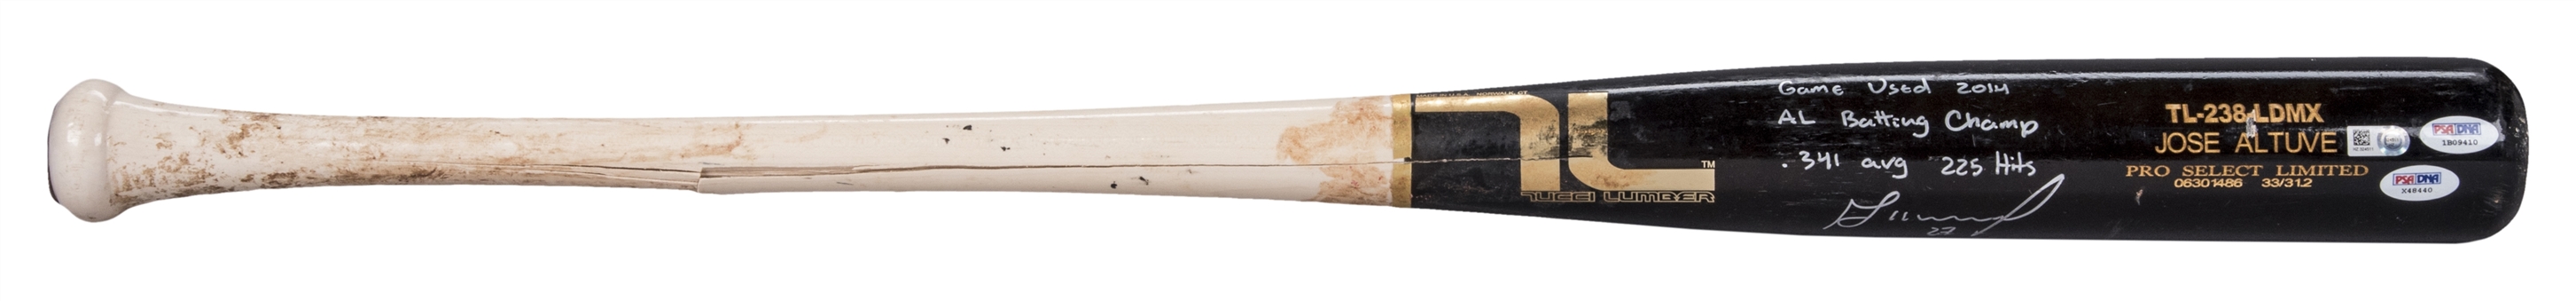 2014 Jose Altuve Game Used and Signed Tucci TL-238-LDMX Model Bat (PSA/DNA & MLB Authenticated)